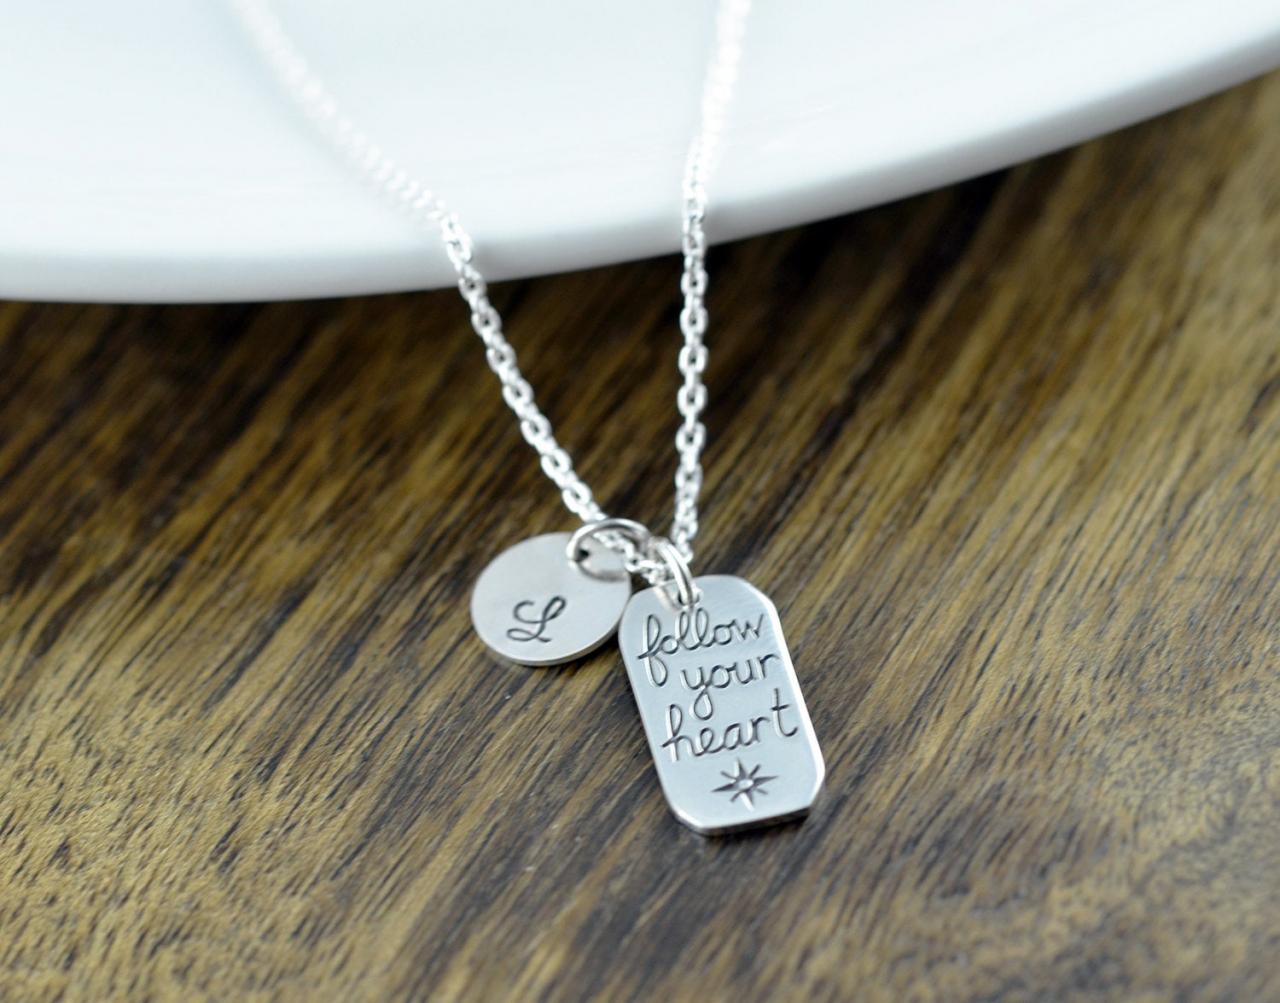 Personalized Silver Follow Your Heart Necklace - Follow Your Heart Necklace, Follow Your Heart Charm, Inspirational Romantic Jewelry